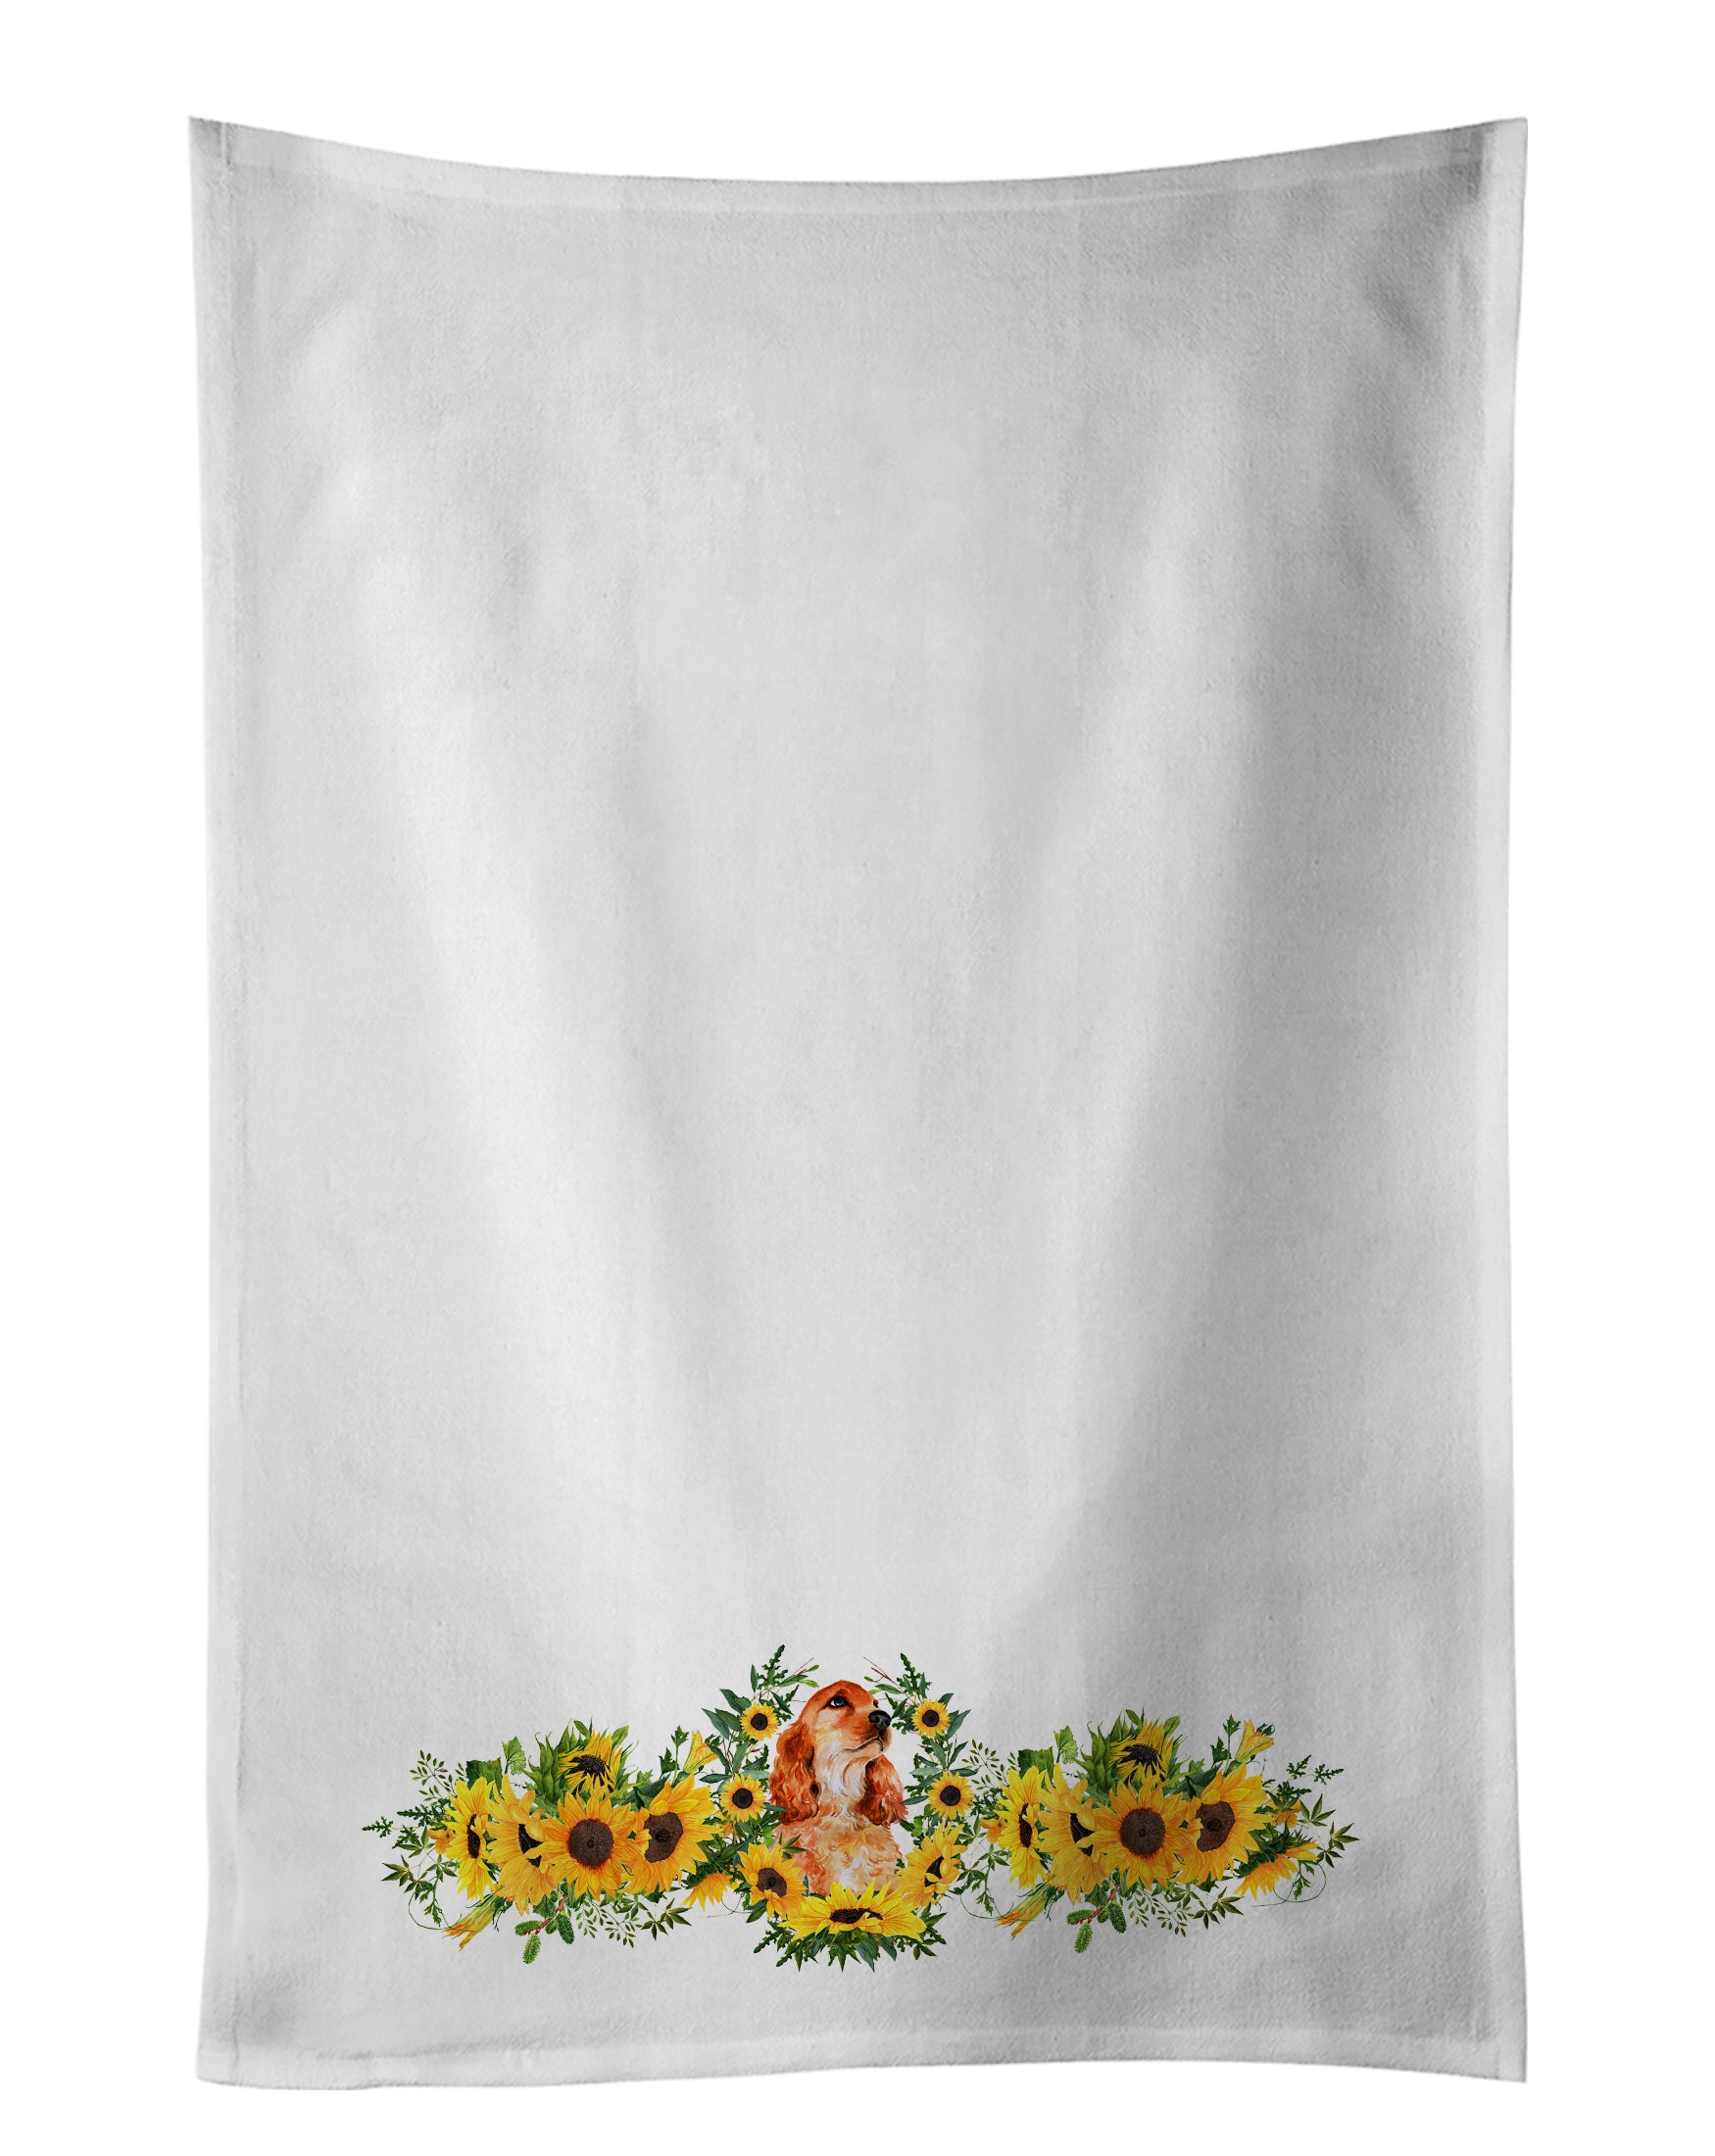 Buy this Cocker Spaniel in Sunflowers White Kitchen Towel Set of 2